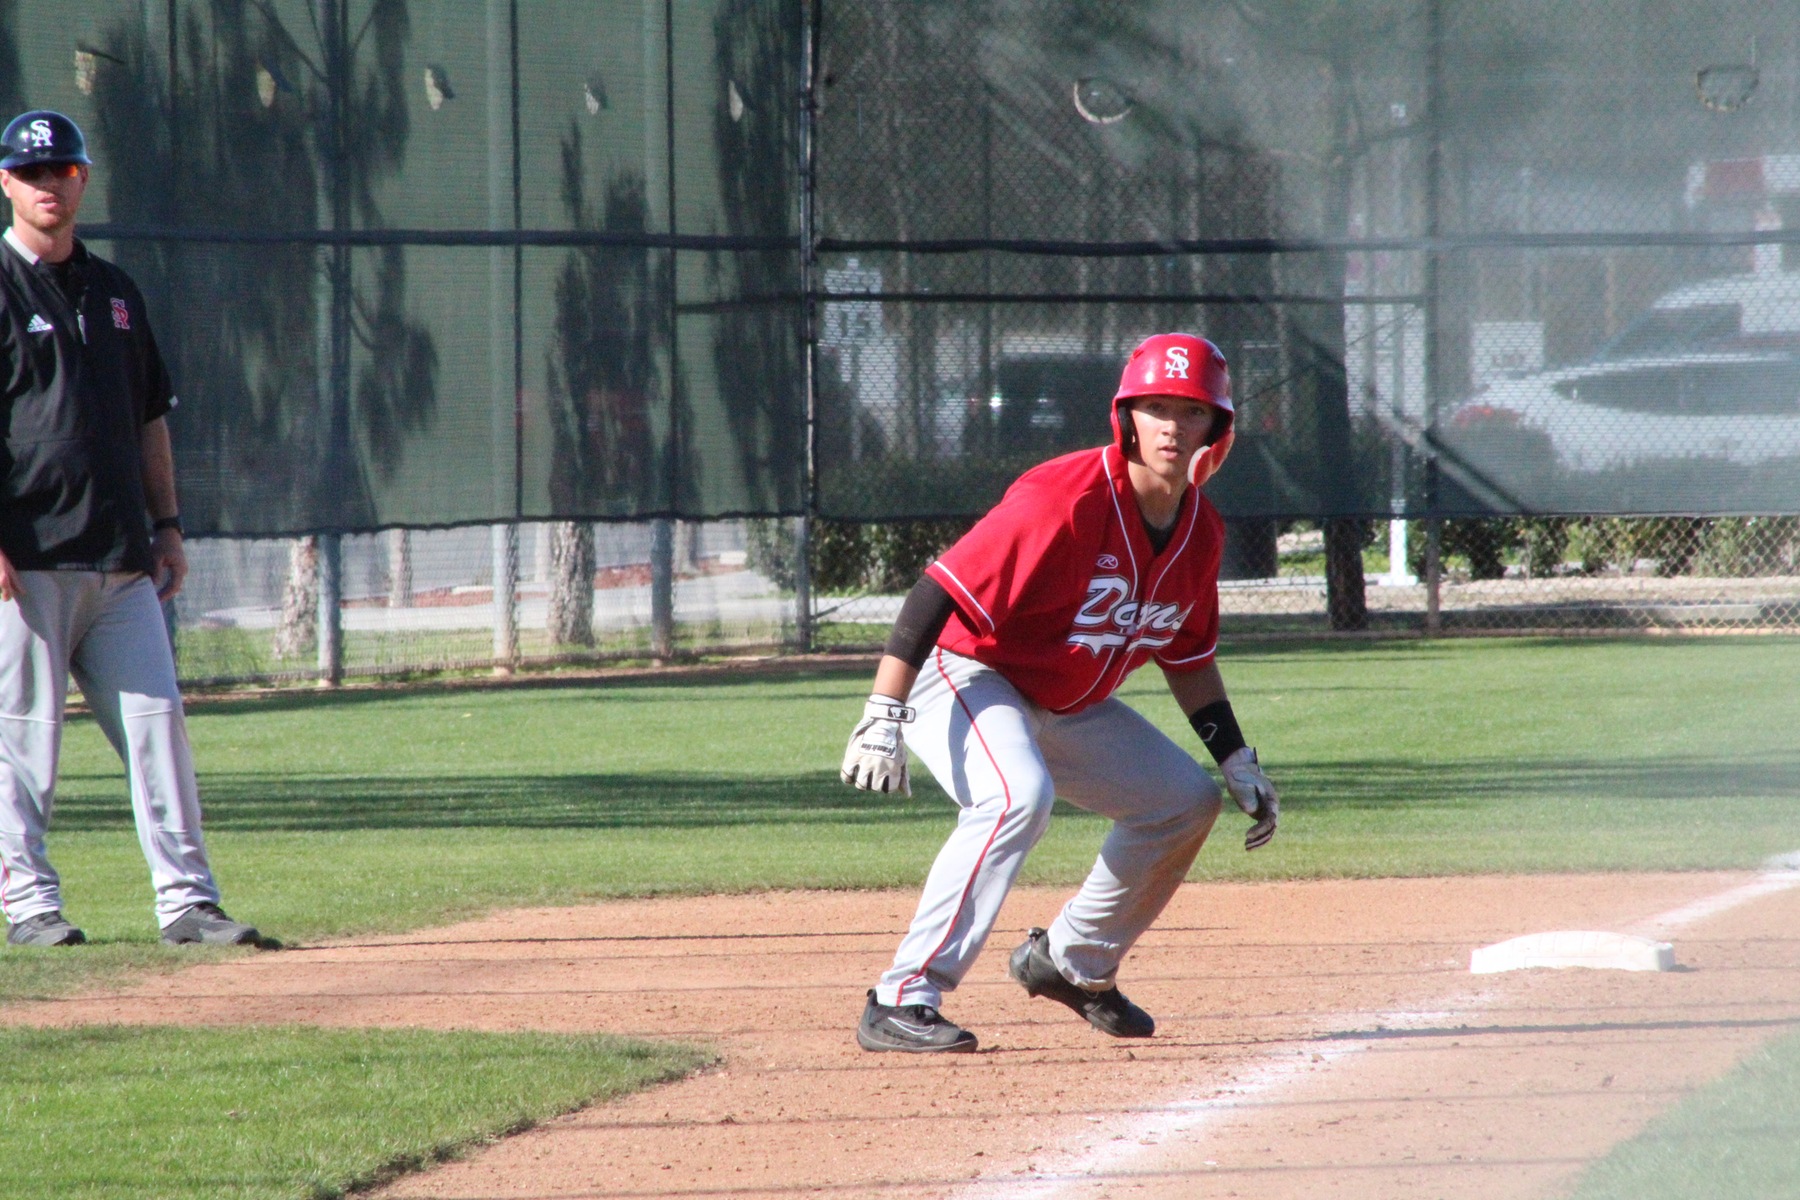 Dons Fall Short of Comeback in 11-10 Loss to Cypress